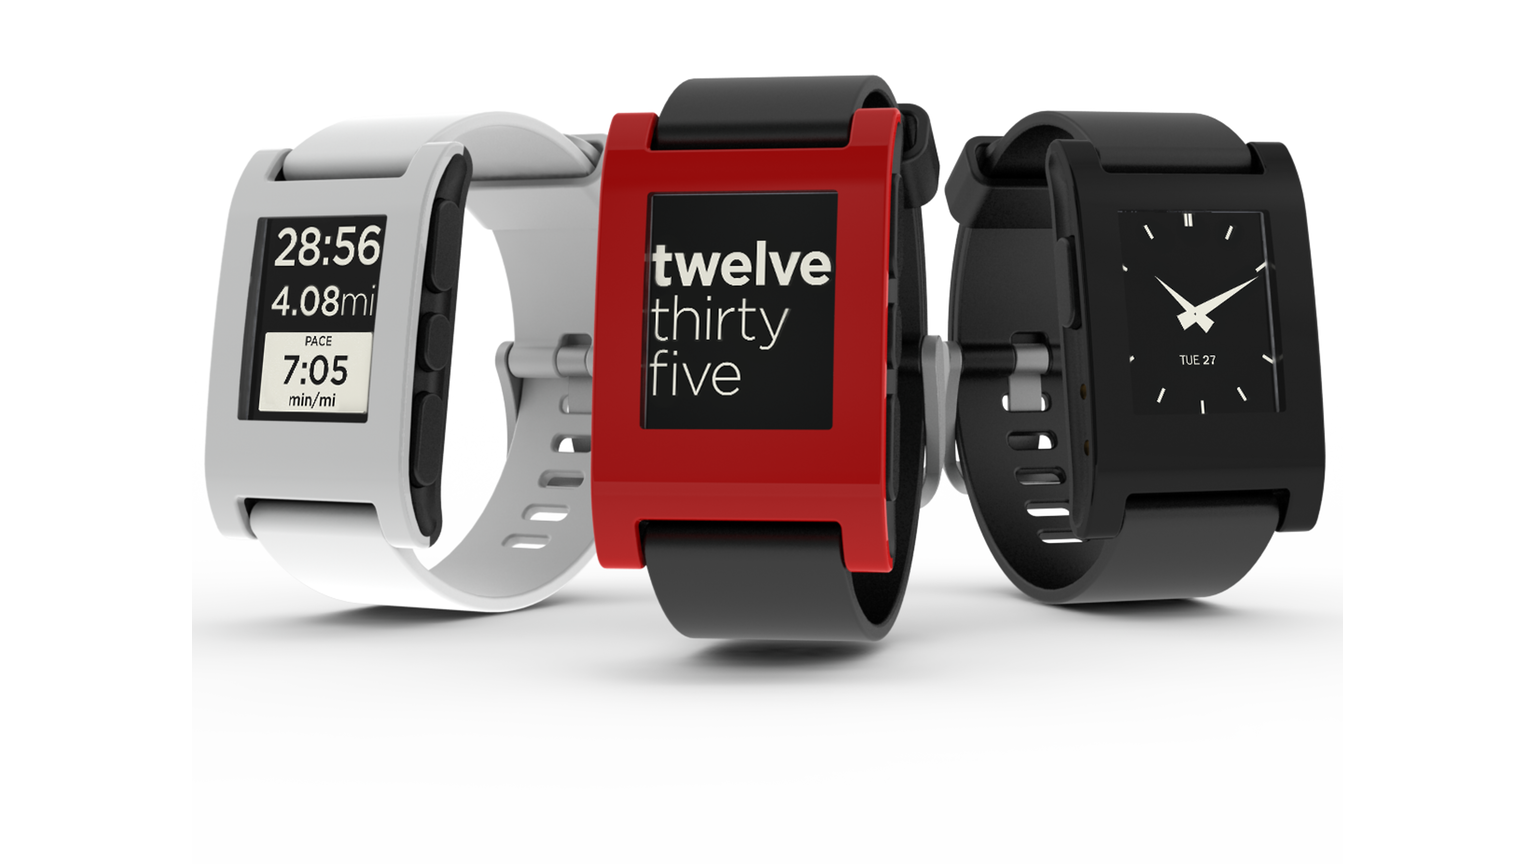 Smart Watch industry consolidation - FitBit could be in talks to acquire Pebble Technology Corporation